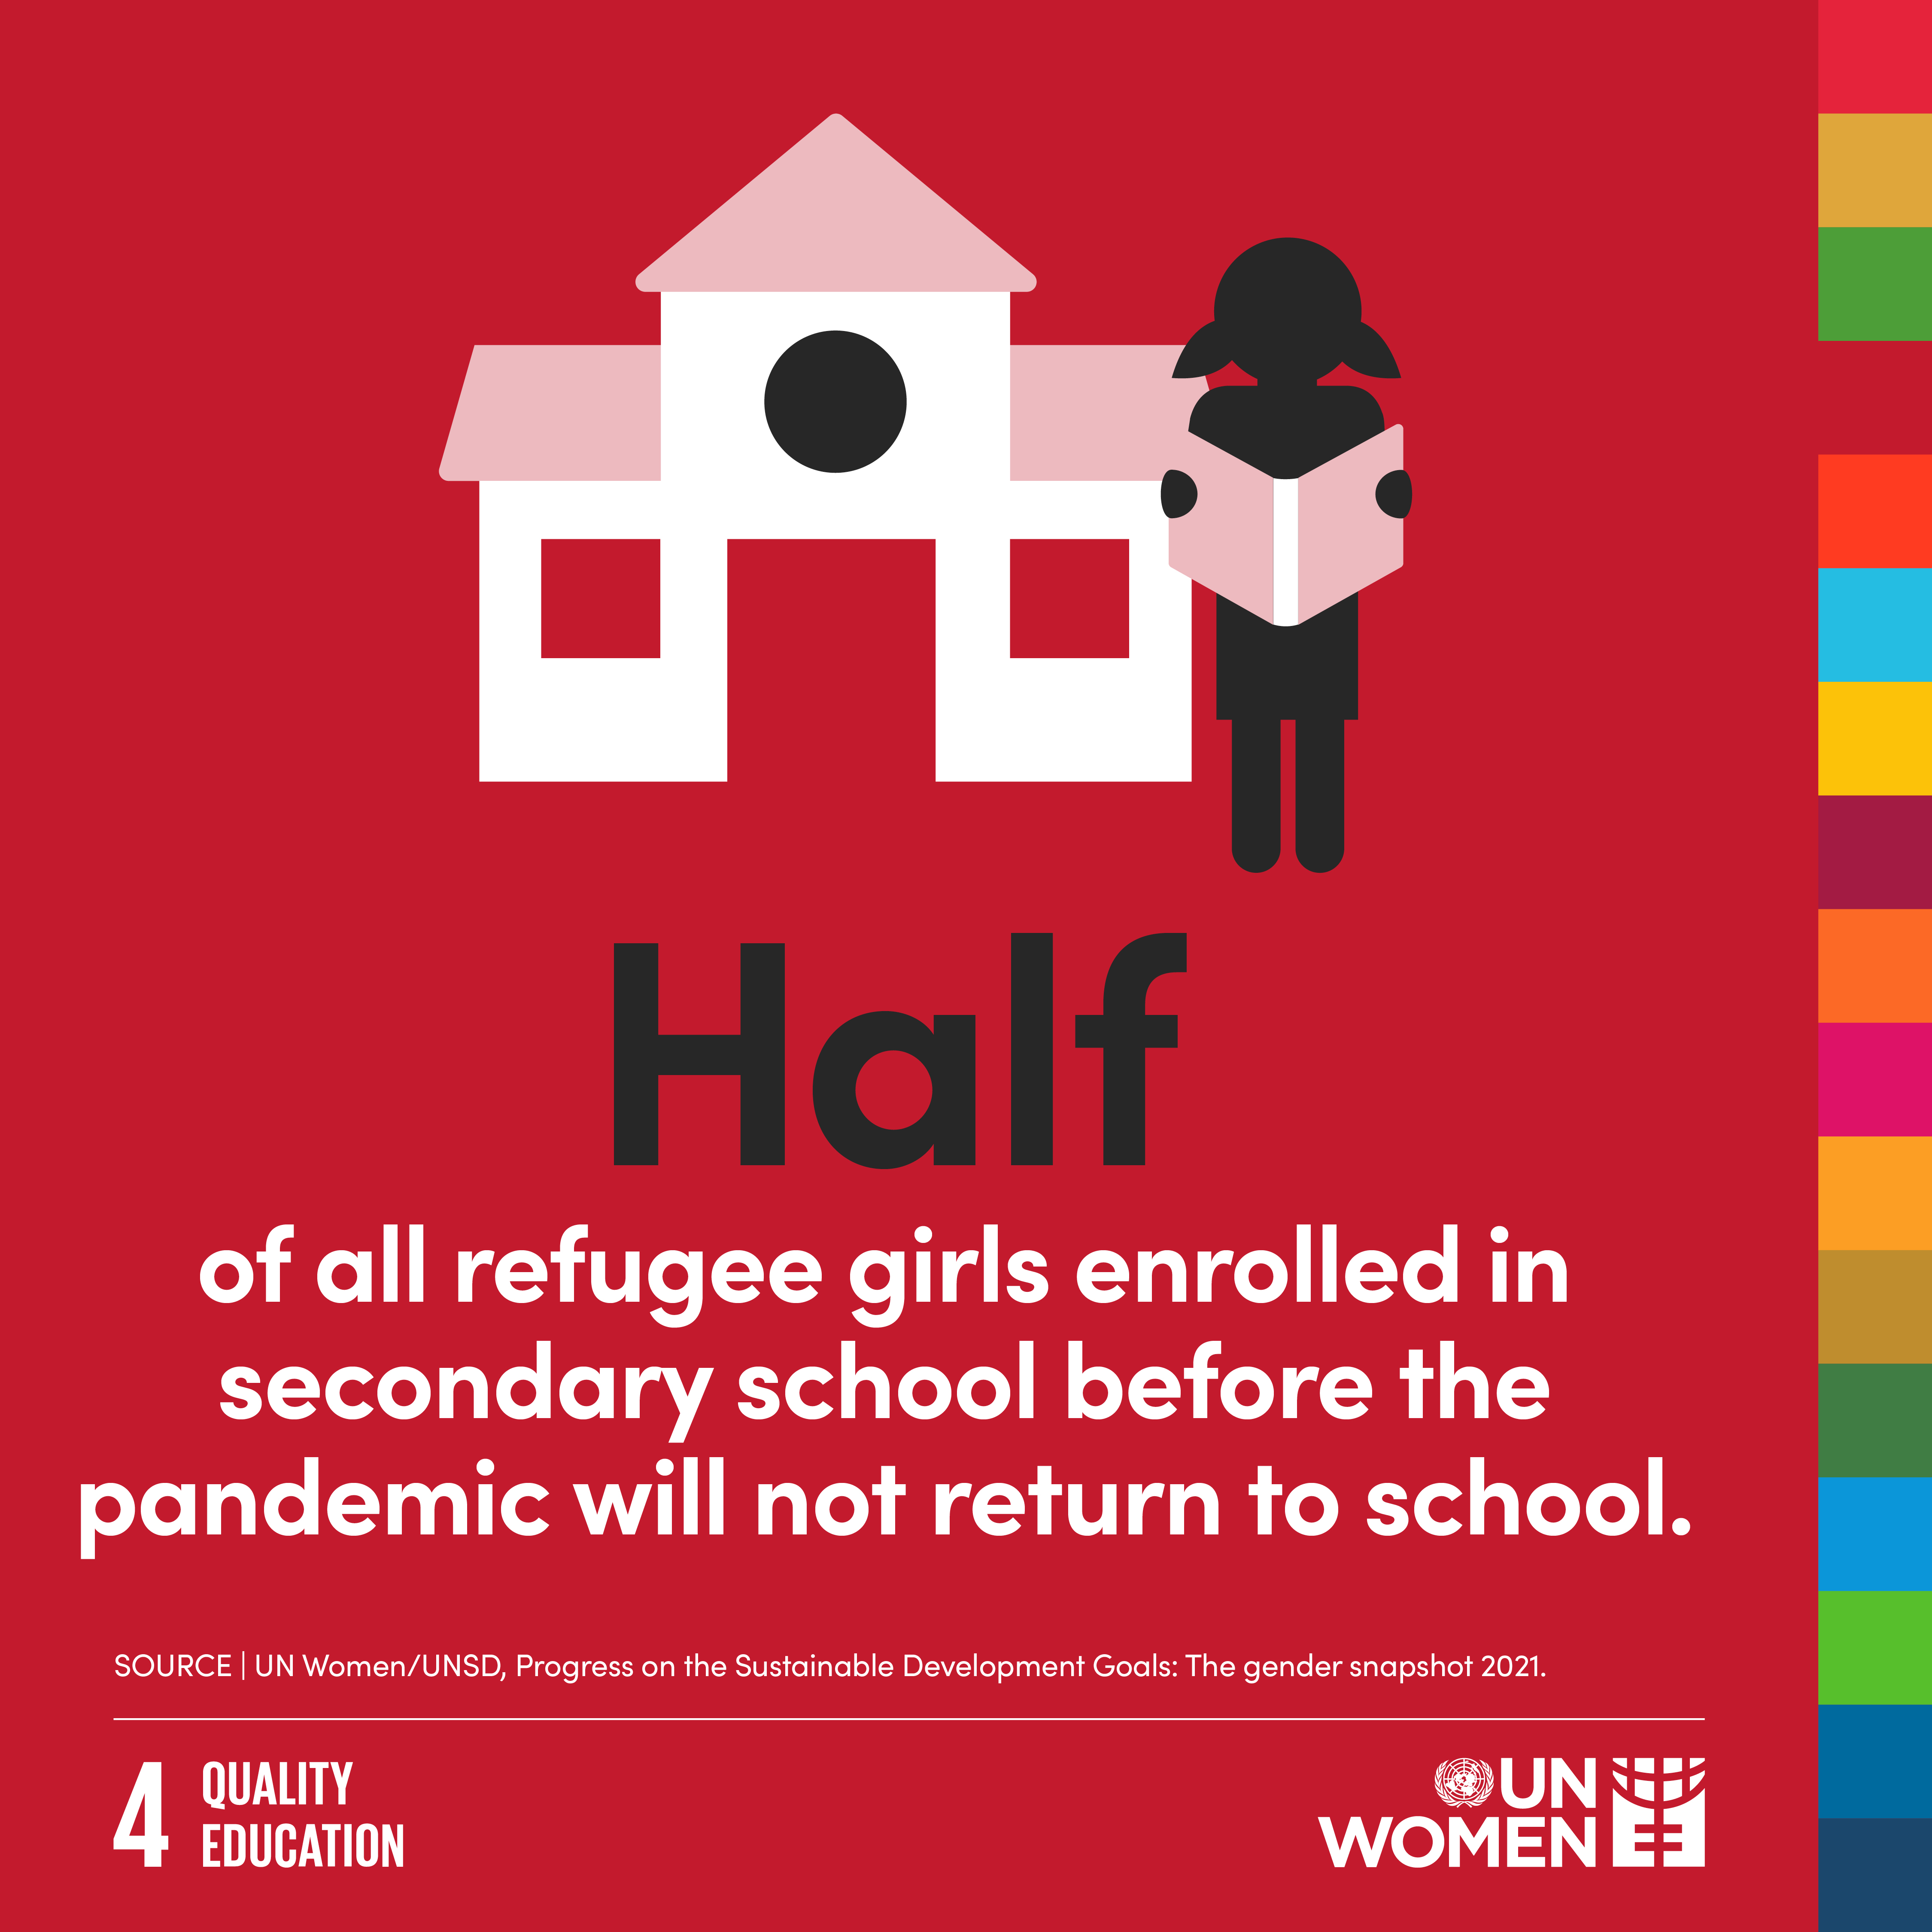 Half of all refugee girls enrolled in secondary school before the pandemic will not return to school.